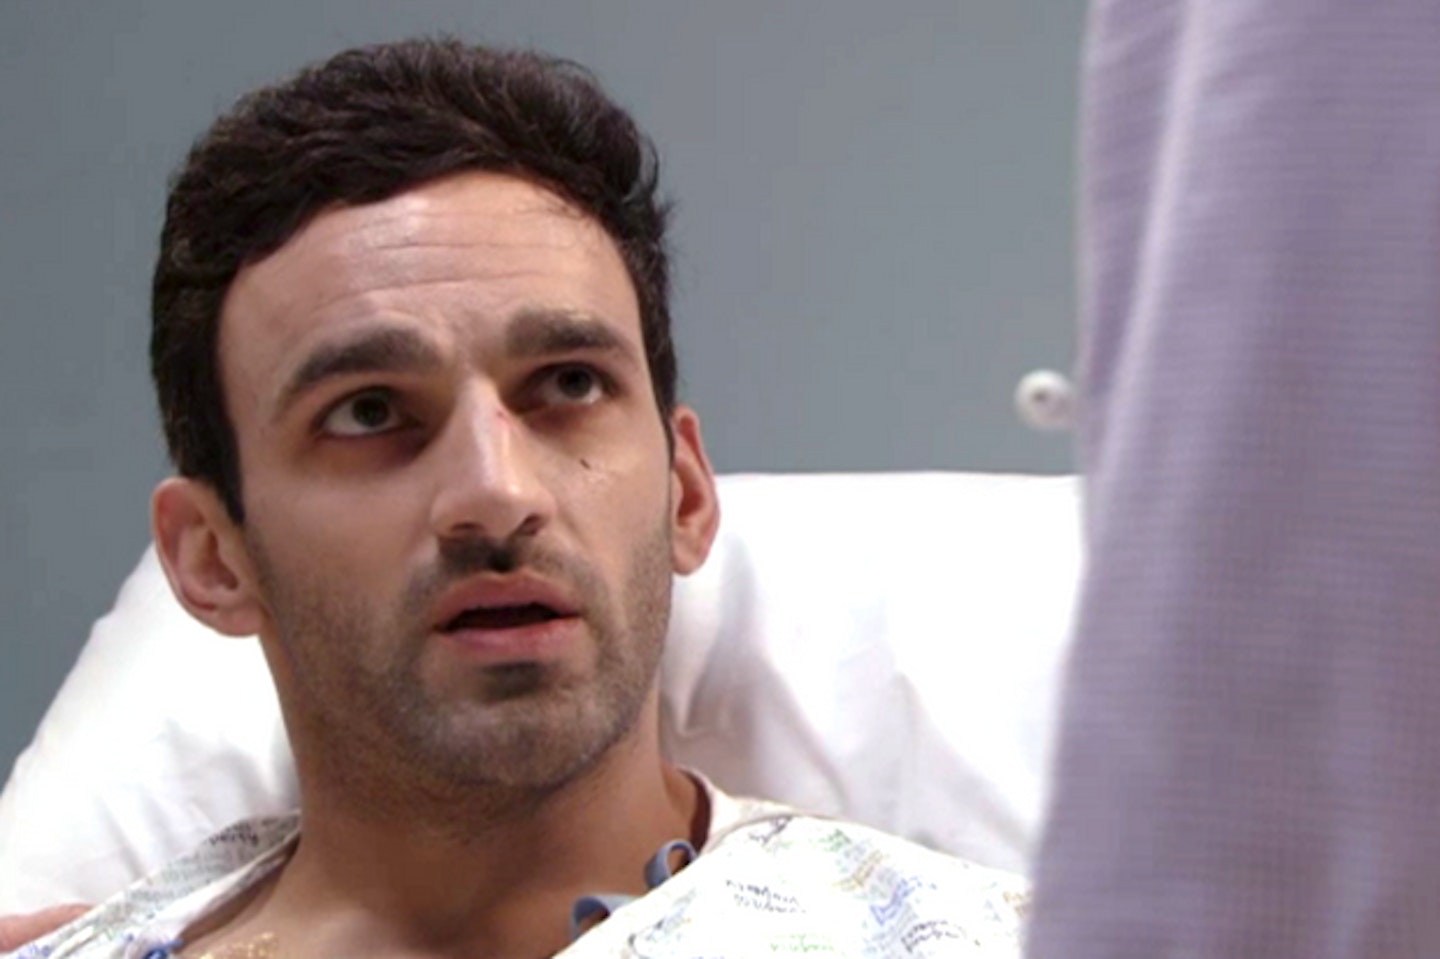 eastenders-viewers-confused-kush-recovery